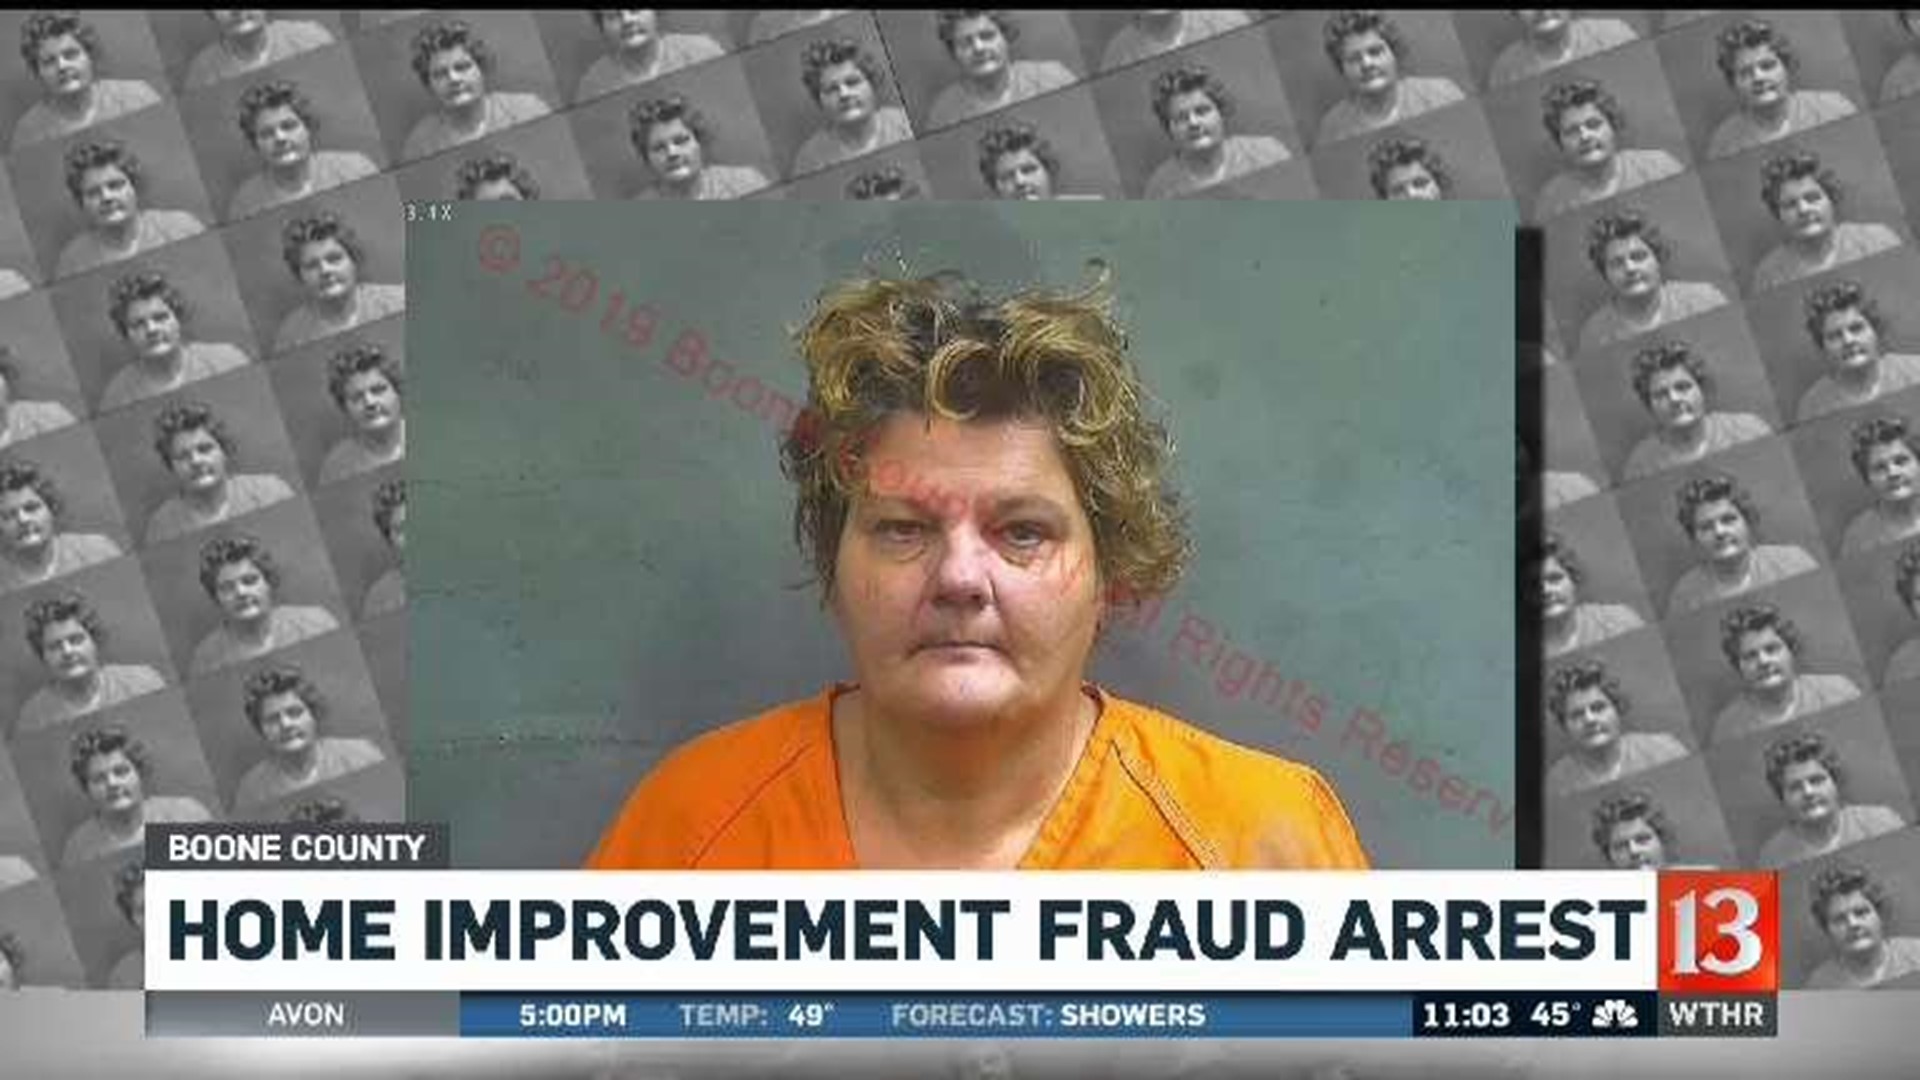 Home improvement fraud charge filed